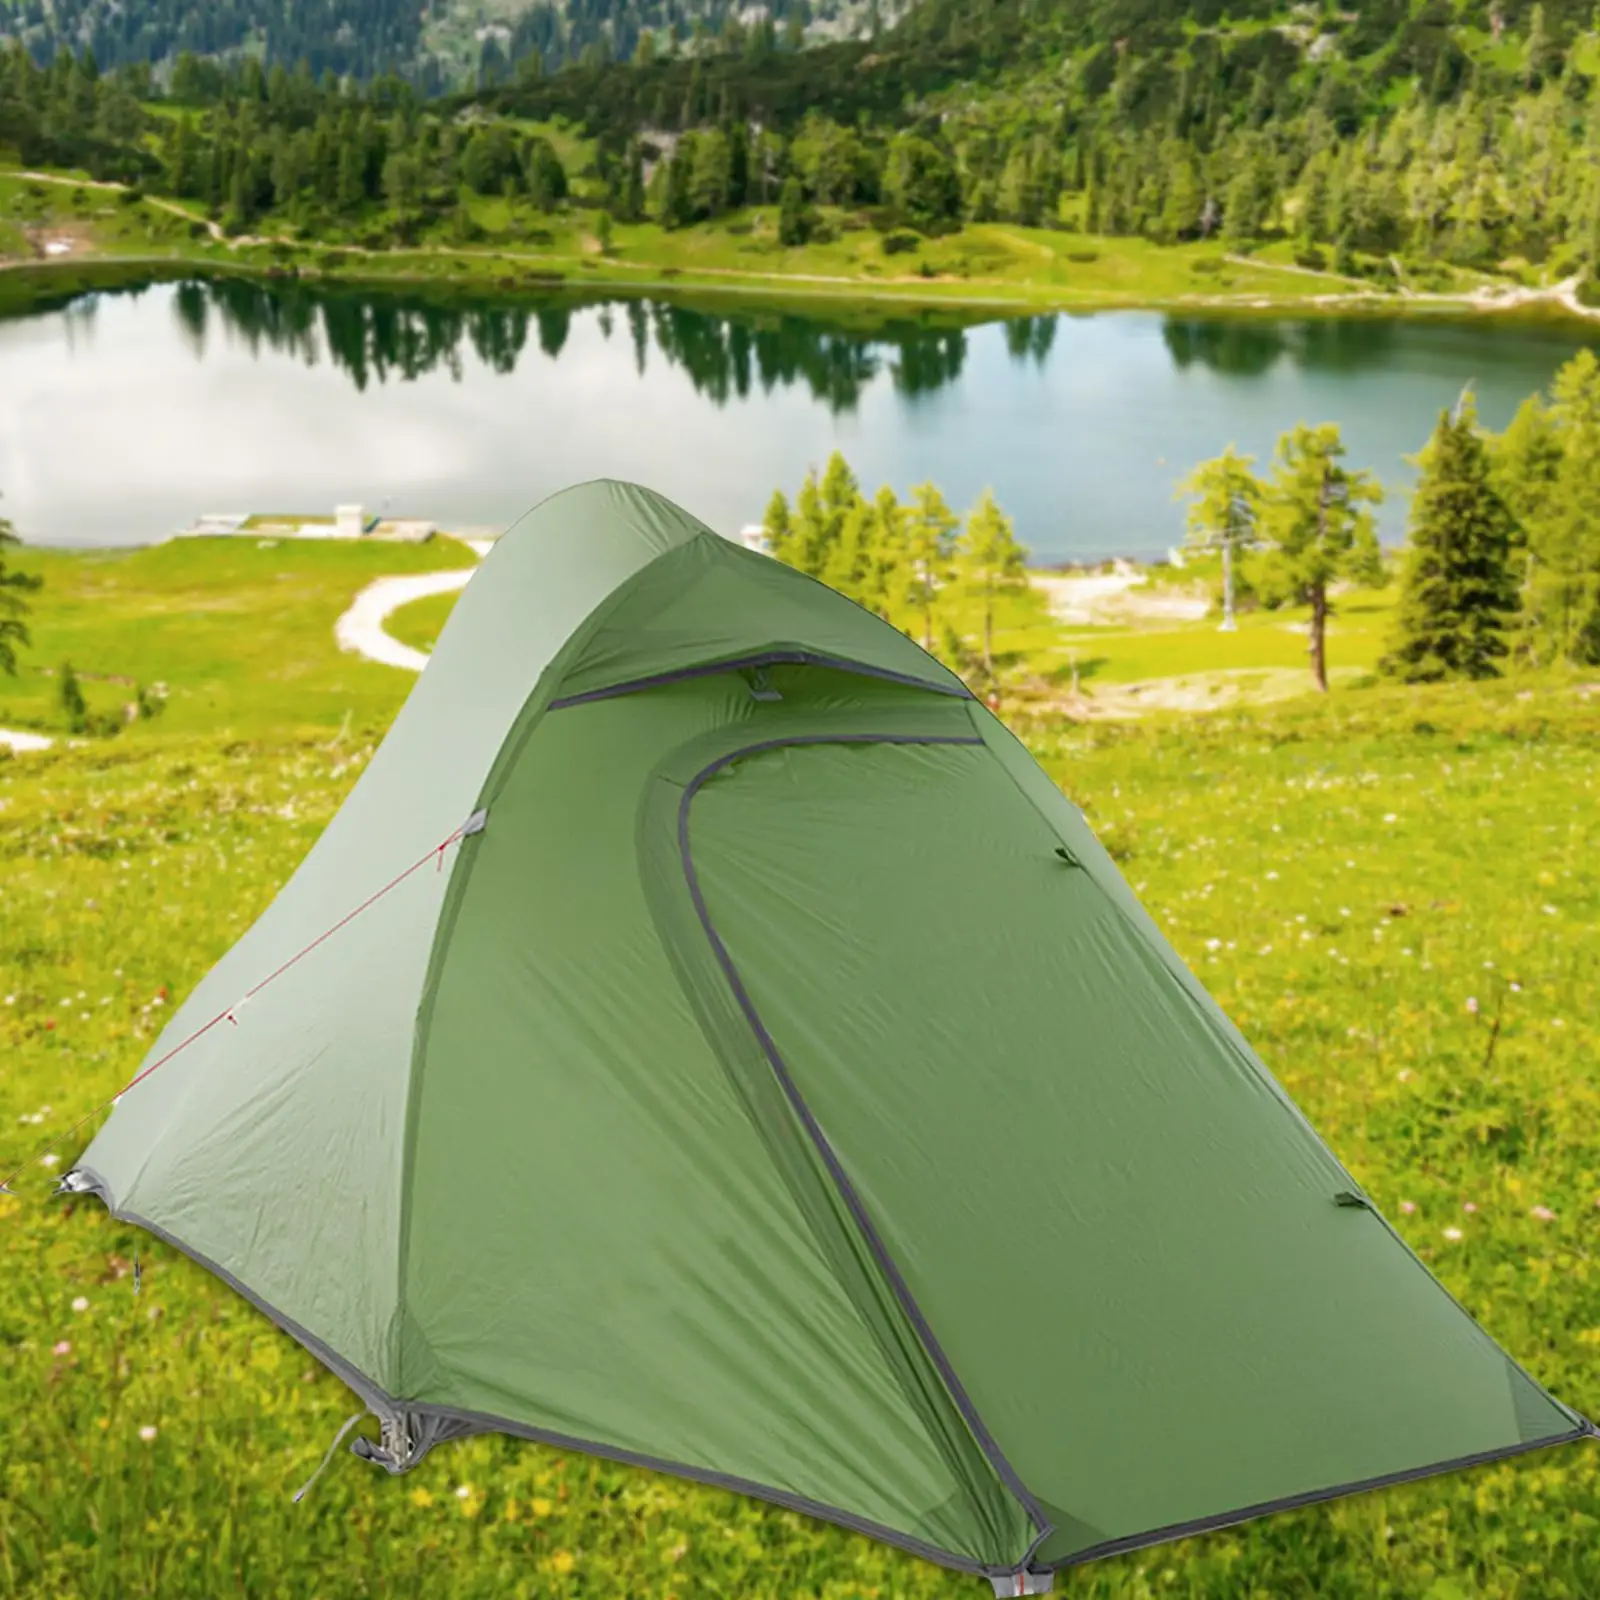 Camping Tent Lightweight Foldable Trekking Tent for Summer Travel Fishing